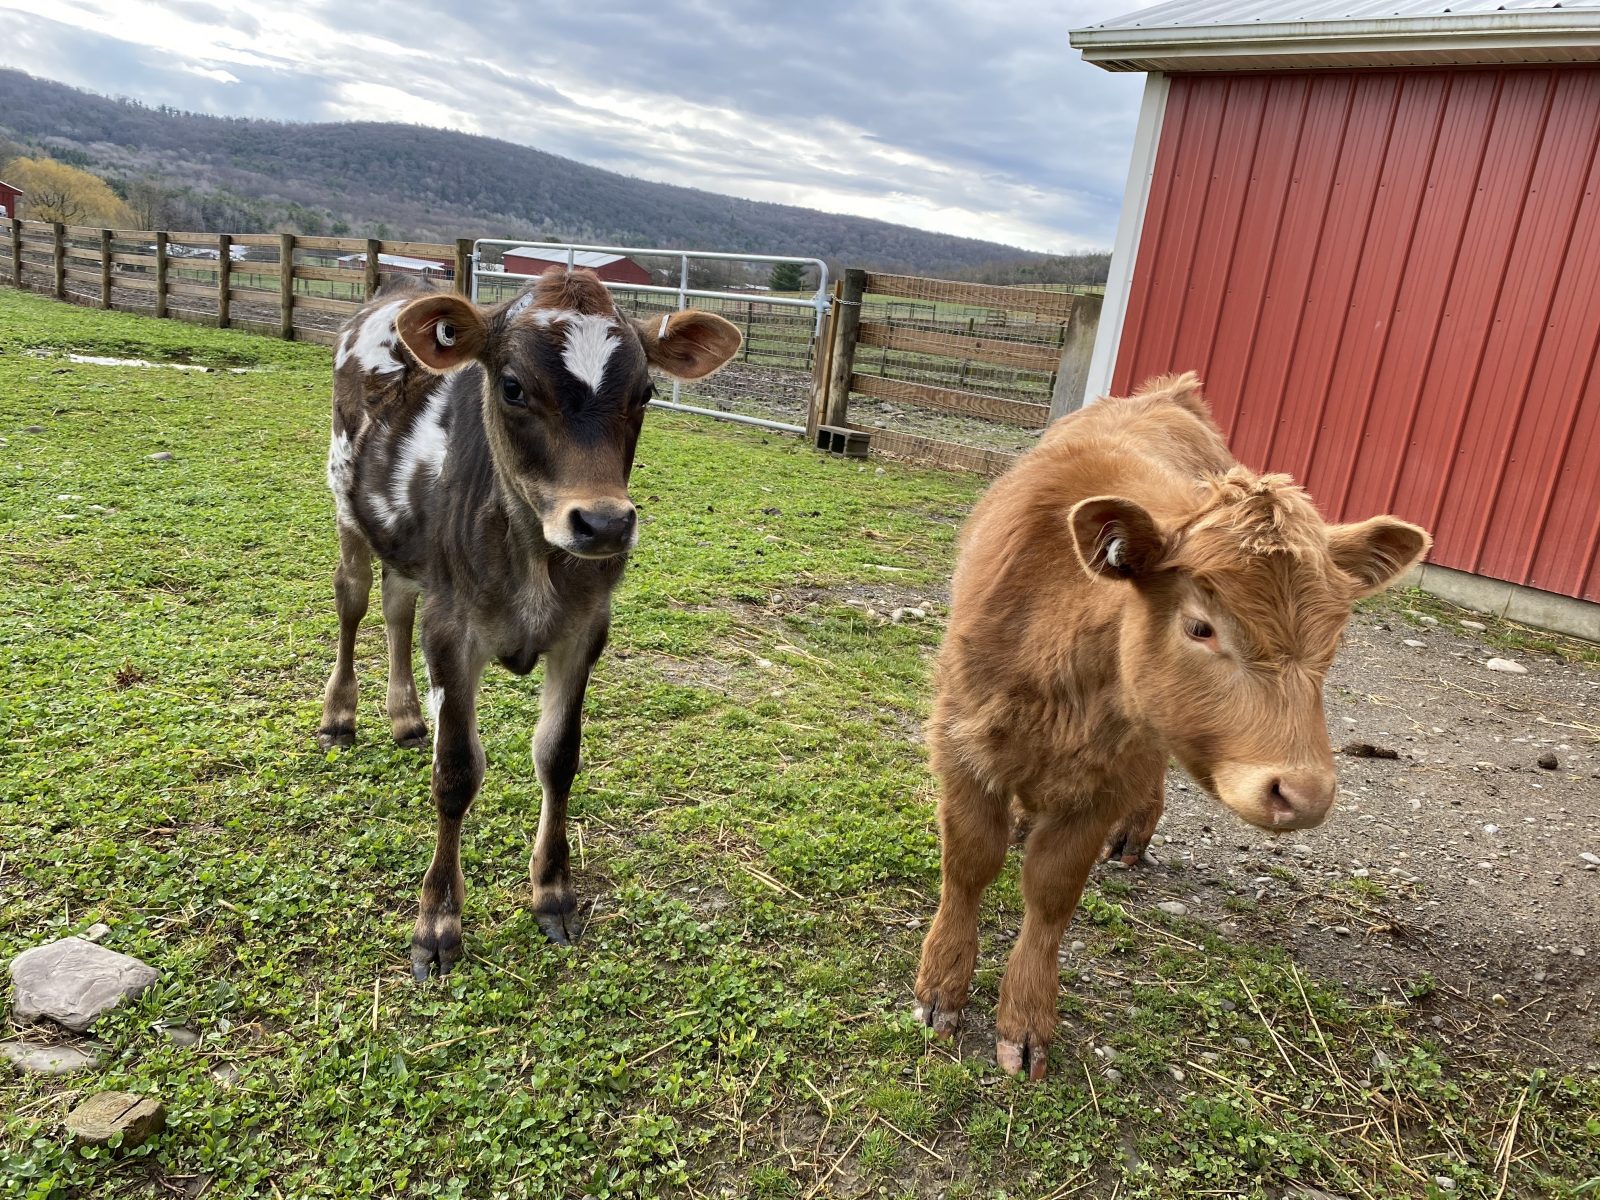 Rescued Cows Bruce and Evan stand outside of a red barn at Farm Sanctuary